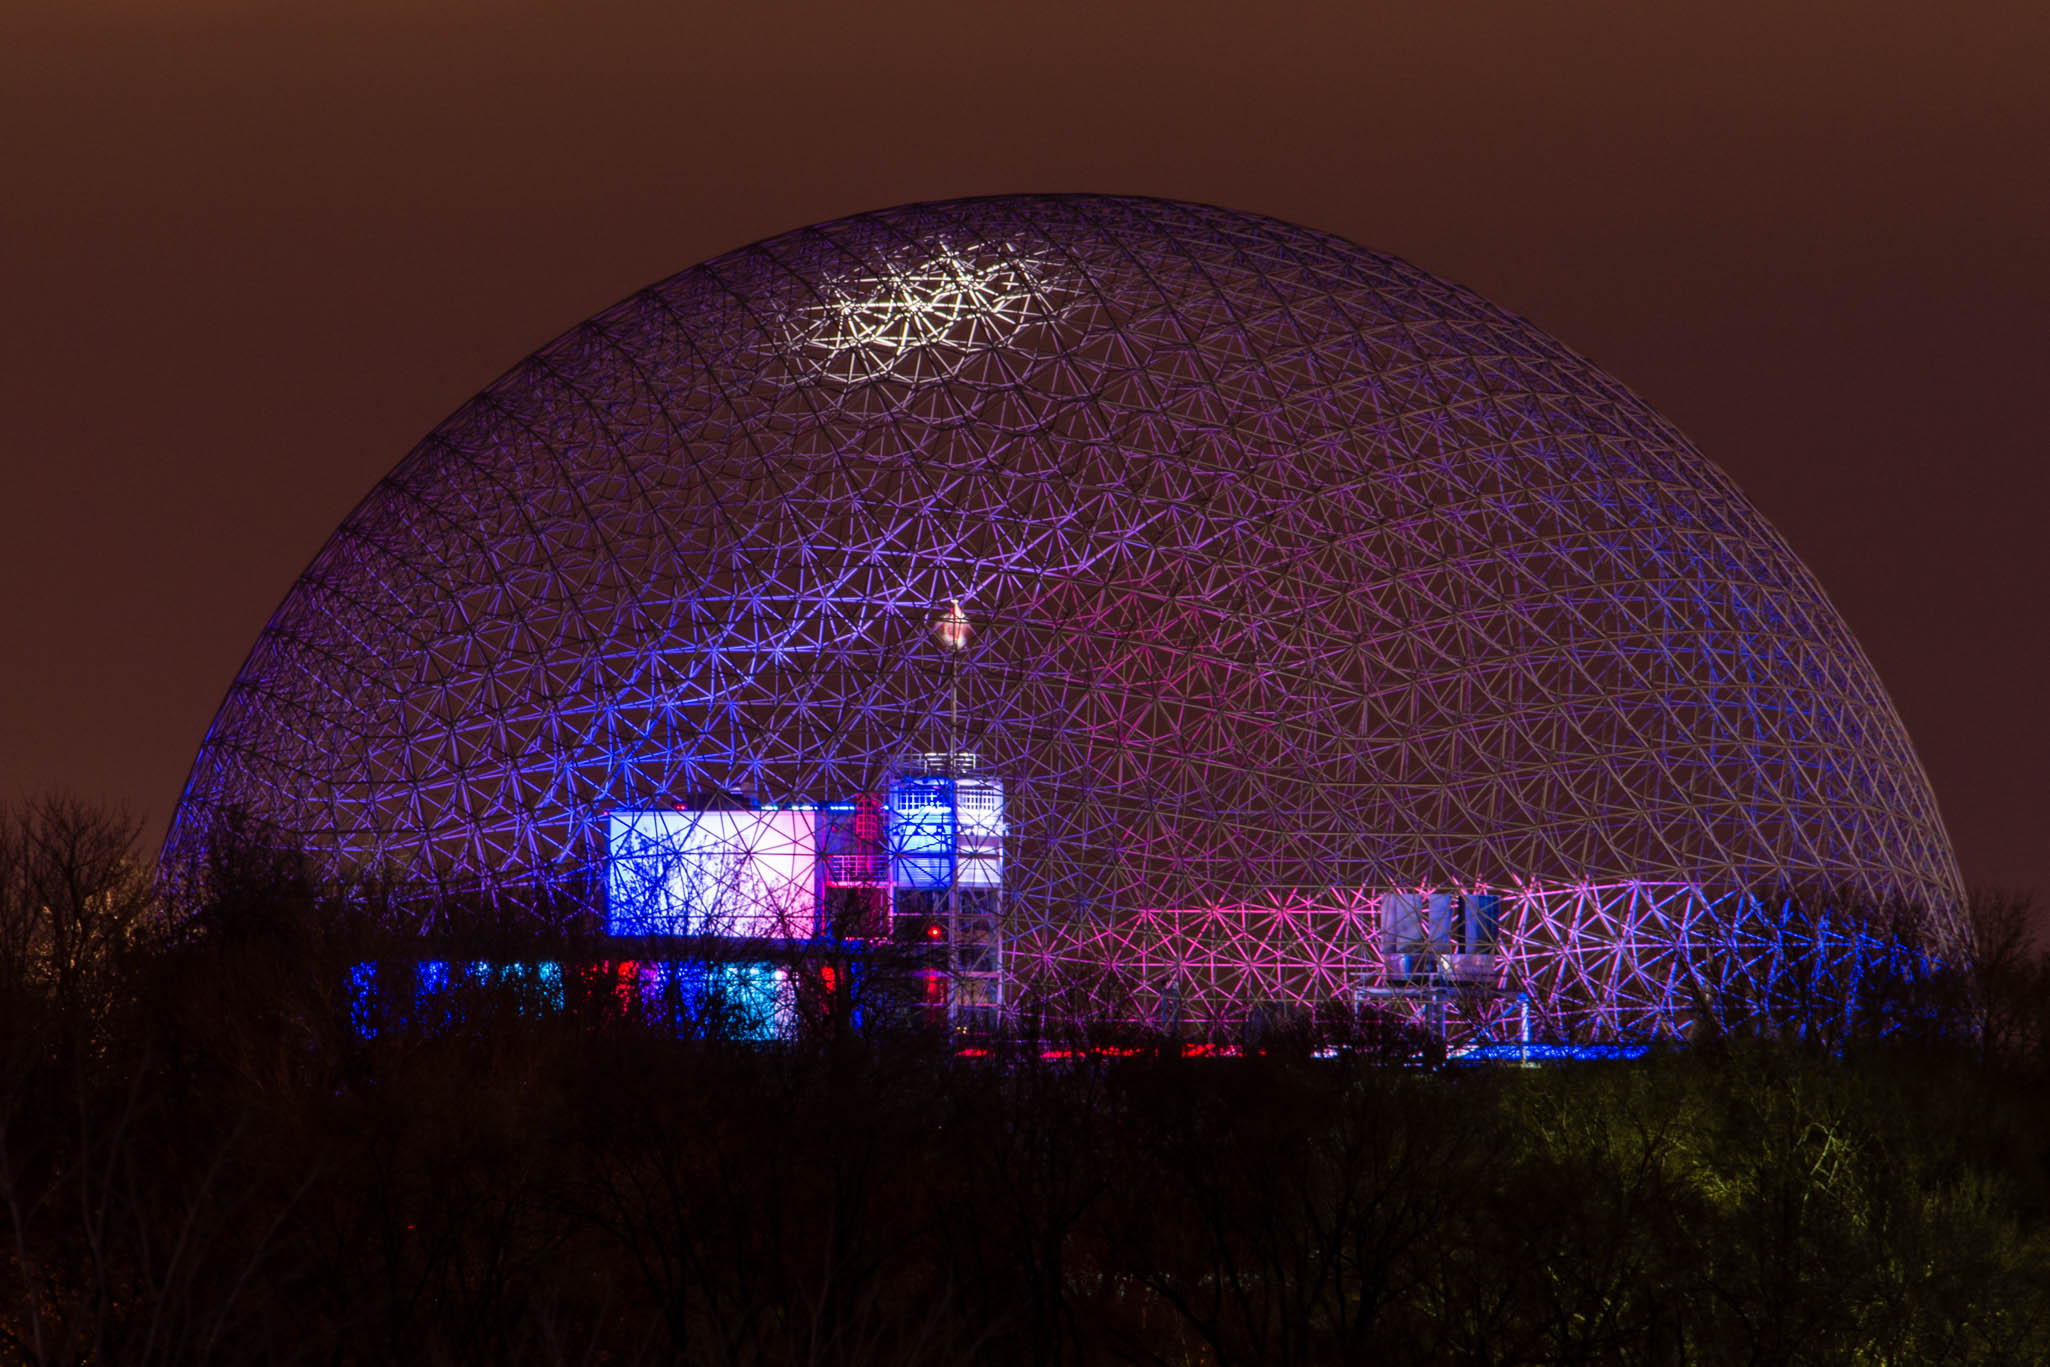 View from the Old Port of the Biosphere at Night in Montreal, Canada